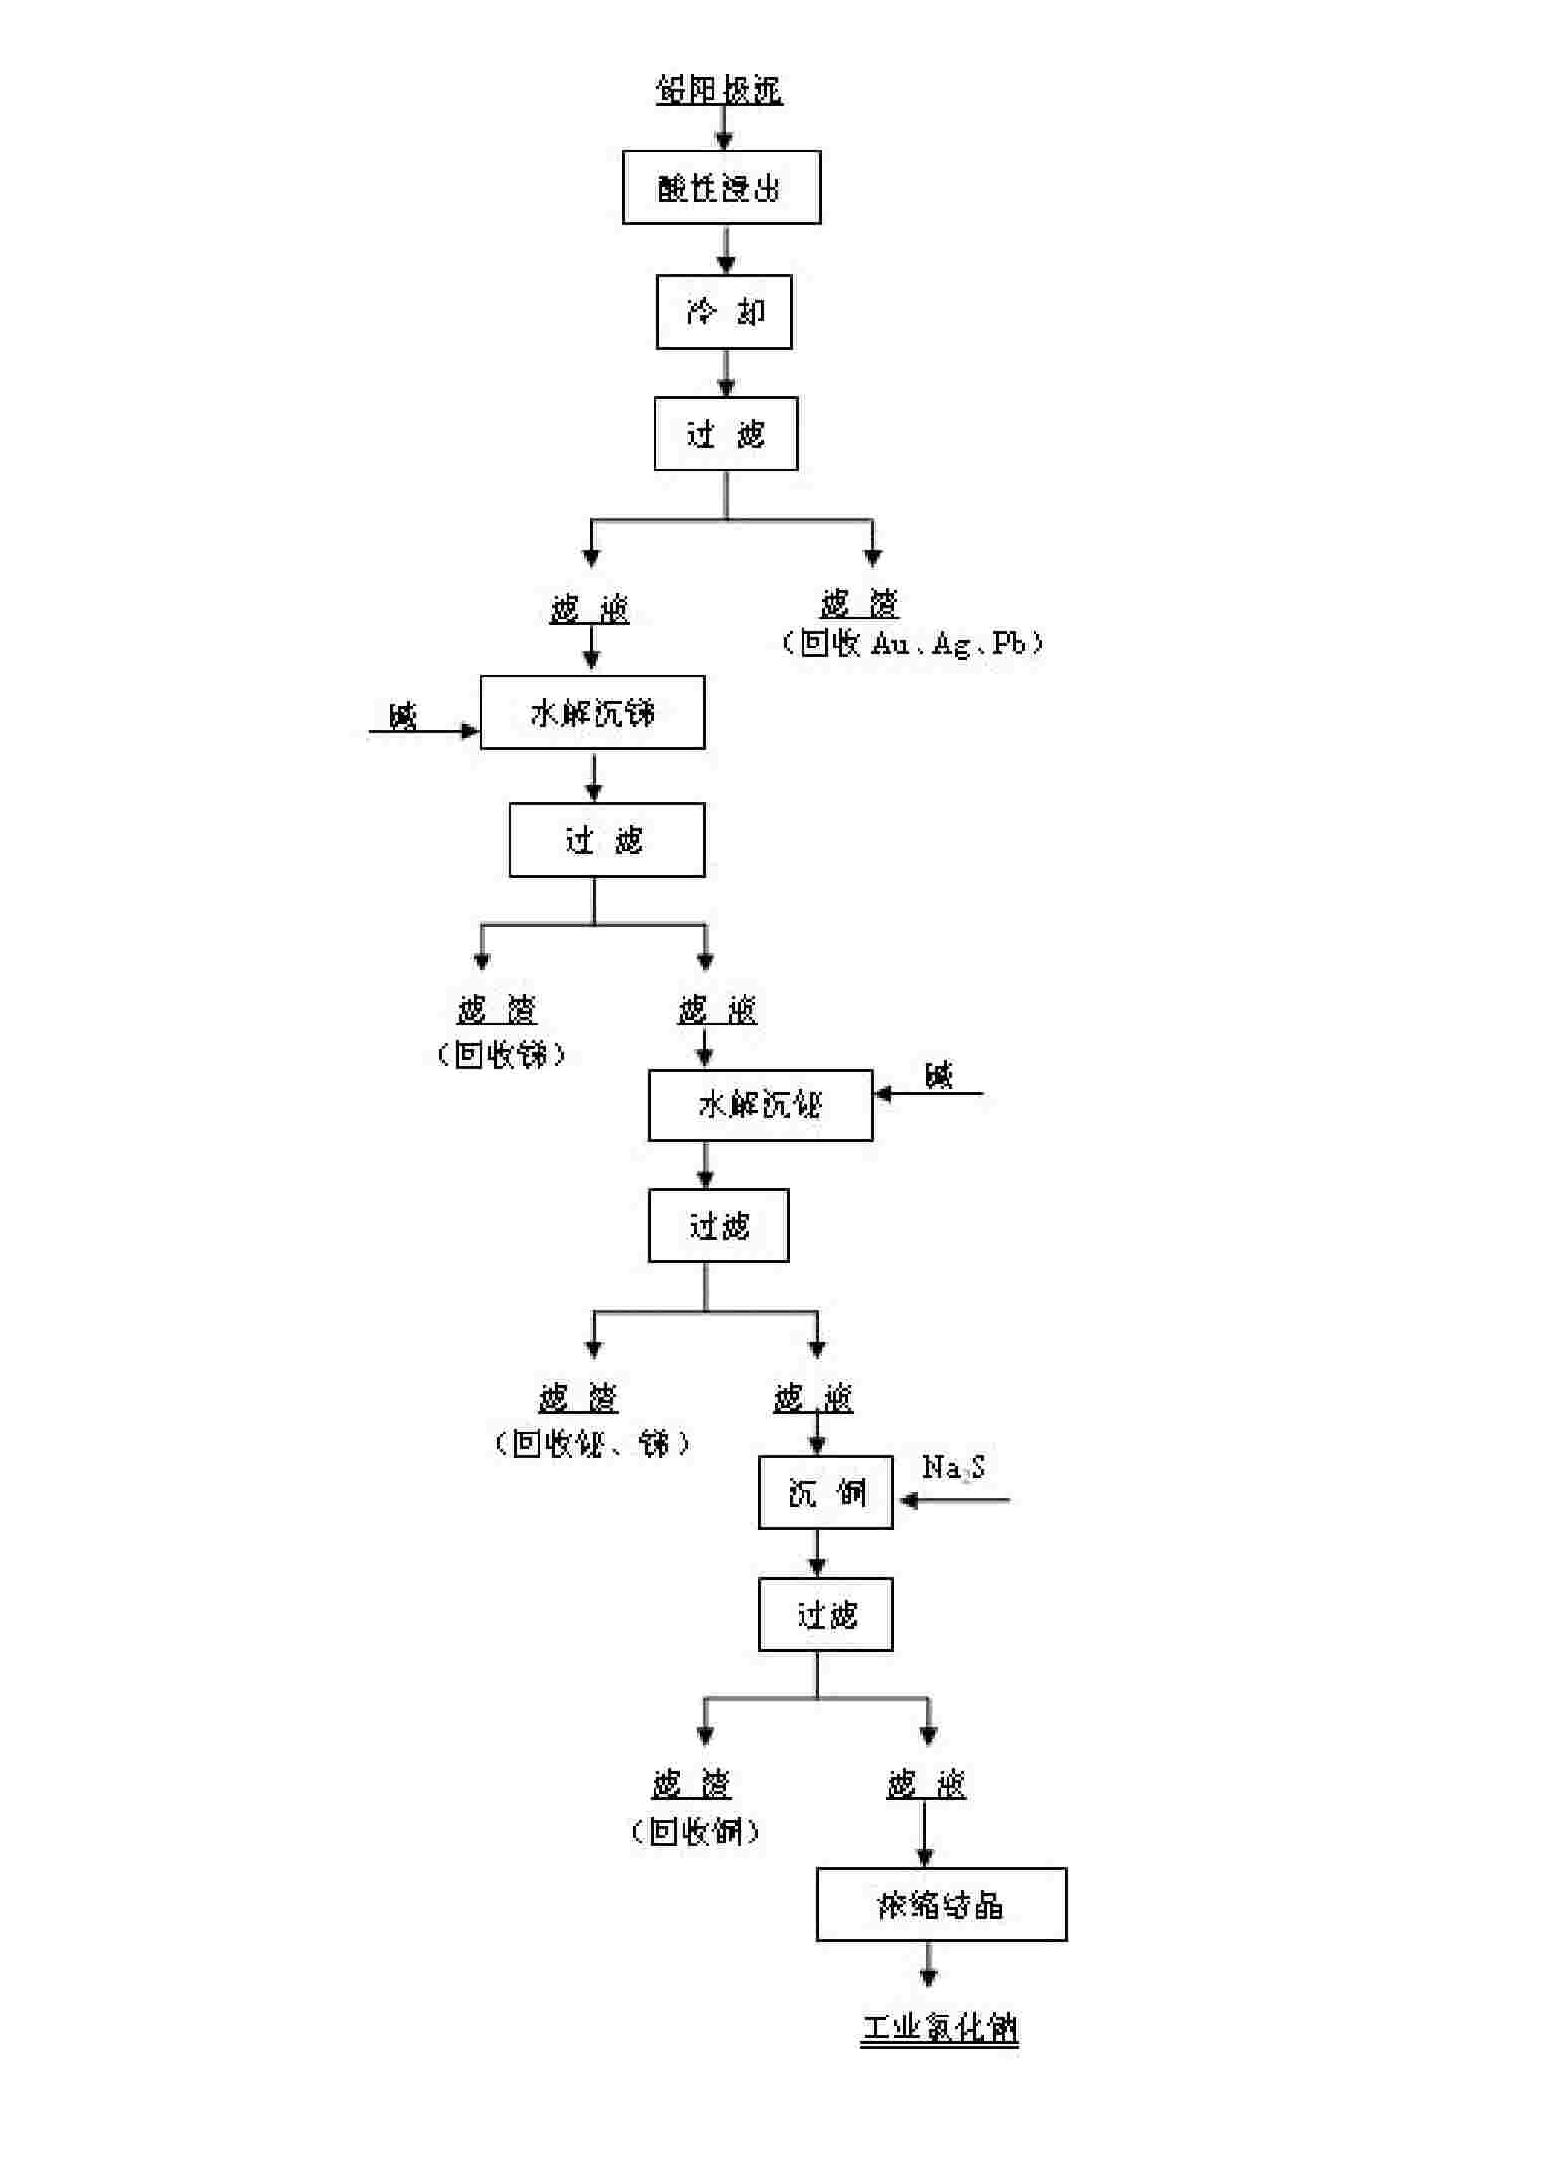 Method for separating valuable metals from lead anode mud